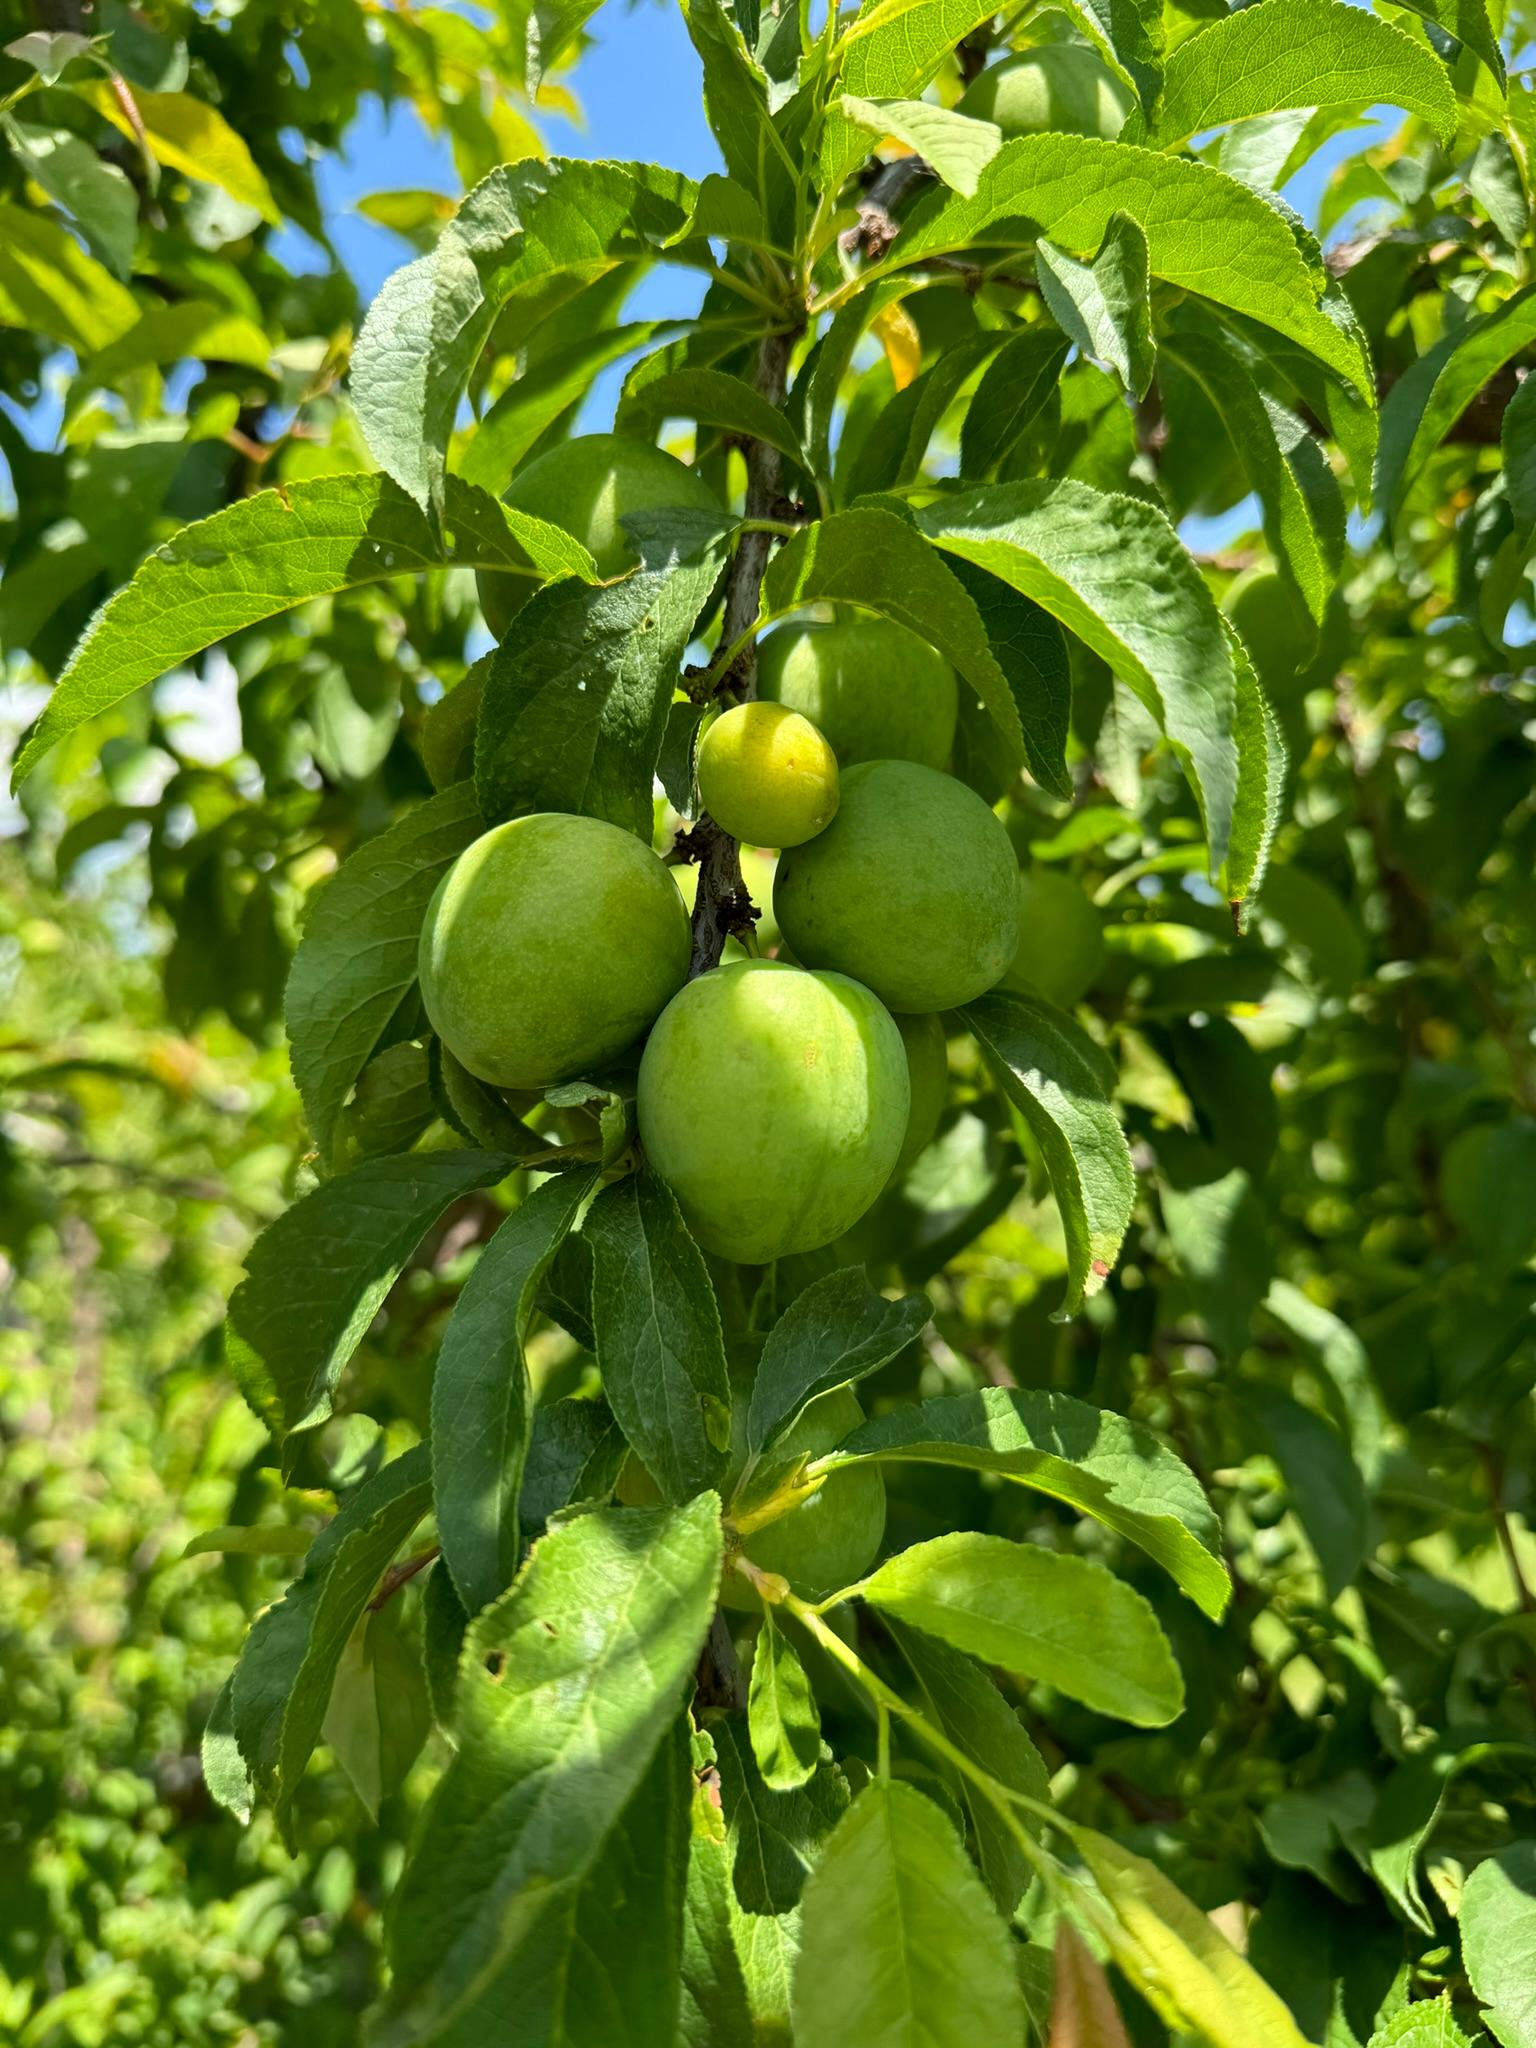 Plums growing on a tree.